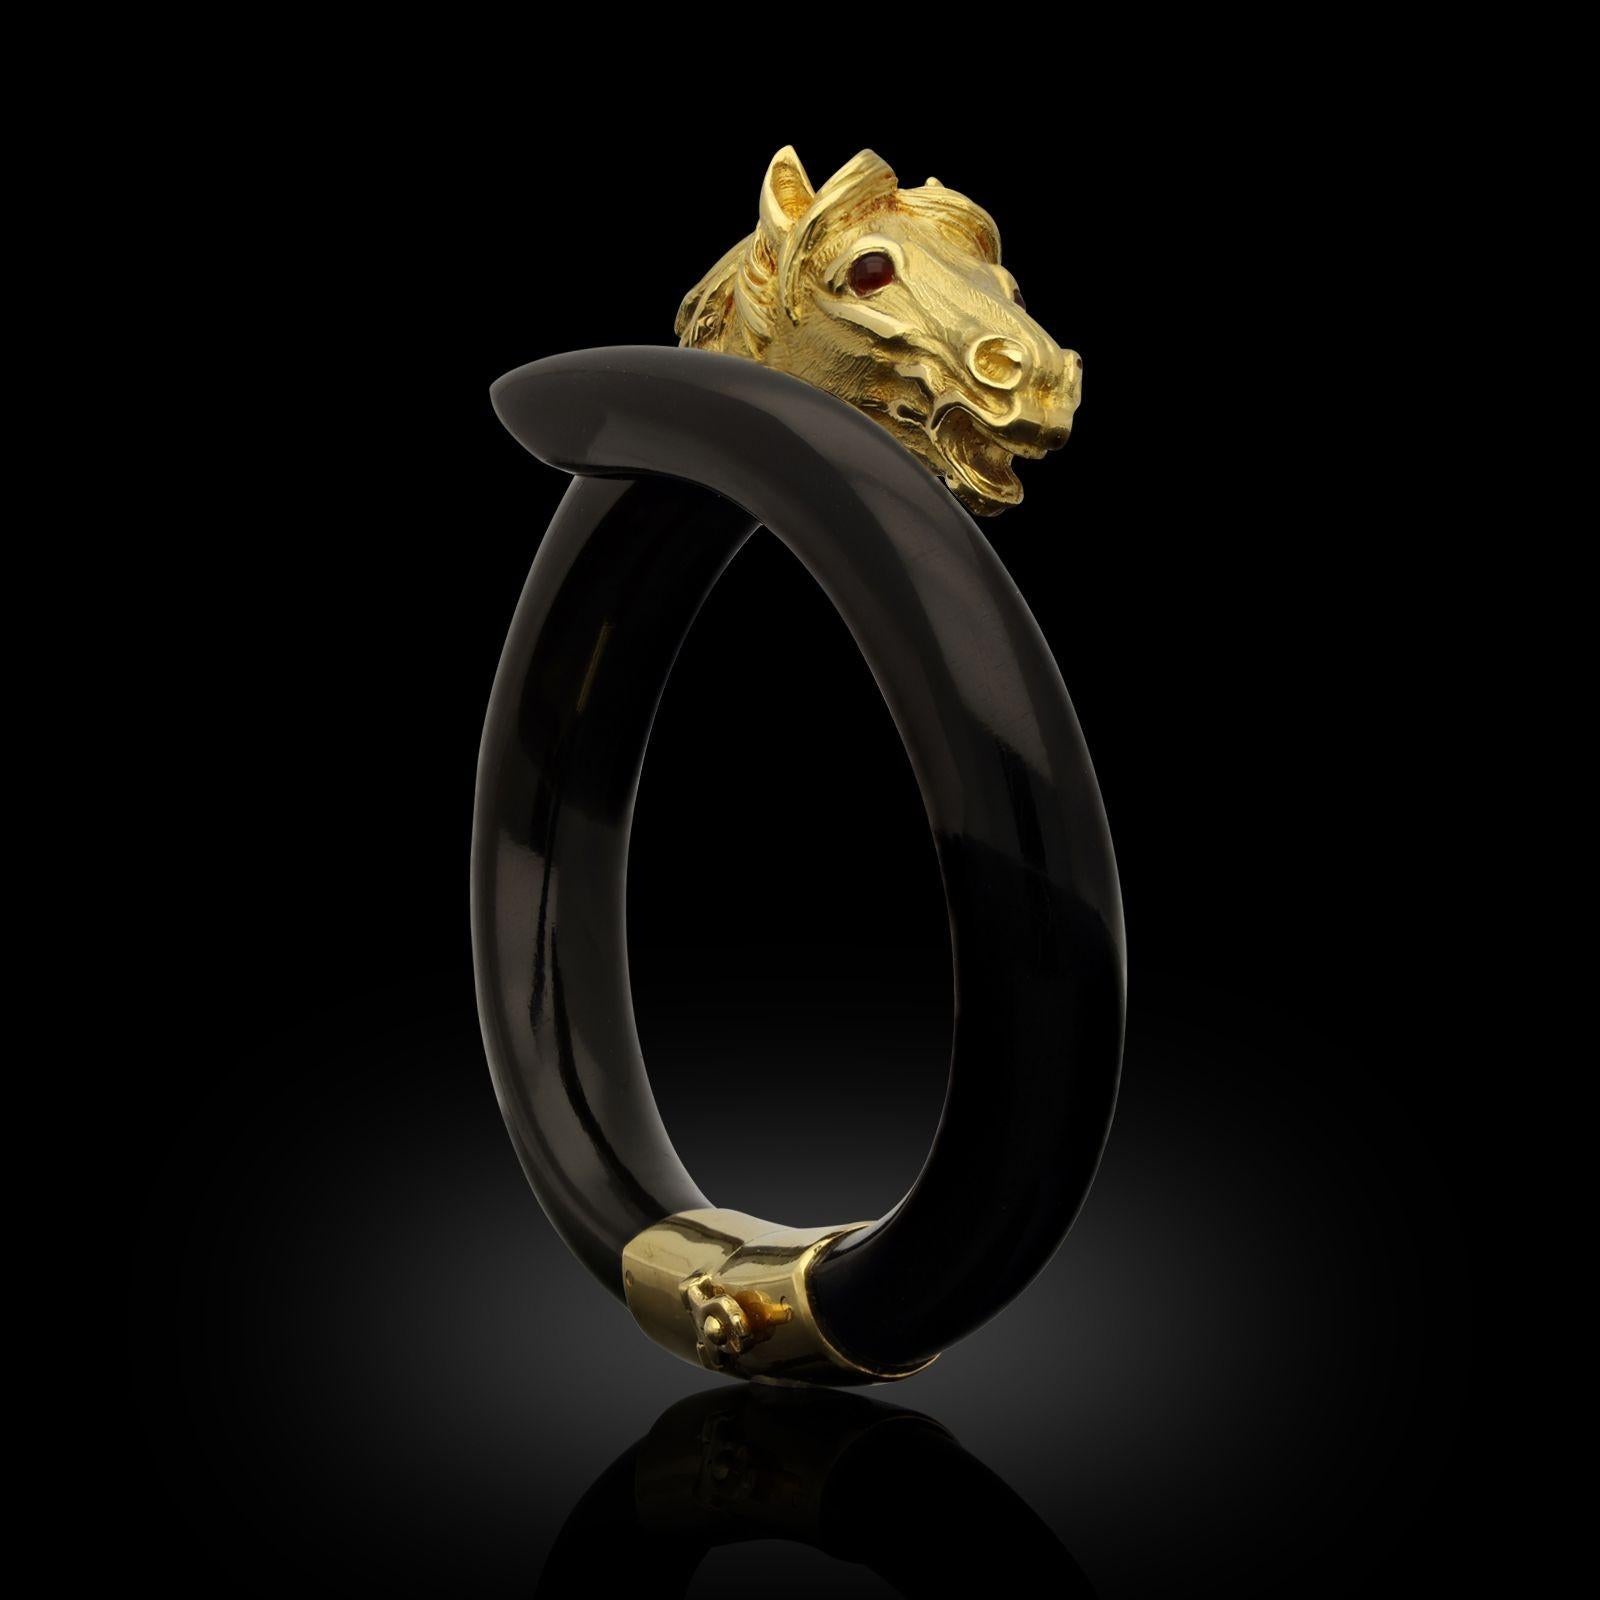 An 18ct gold and wooden stallion’s head bangle by Gay Freres c.1970s, the open by-pass style bangle fashioned from smoothly carved and polished ebony wood with one tapering end and the other set with an 18ct yellow gold stallion’s head with mane